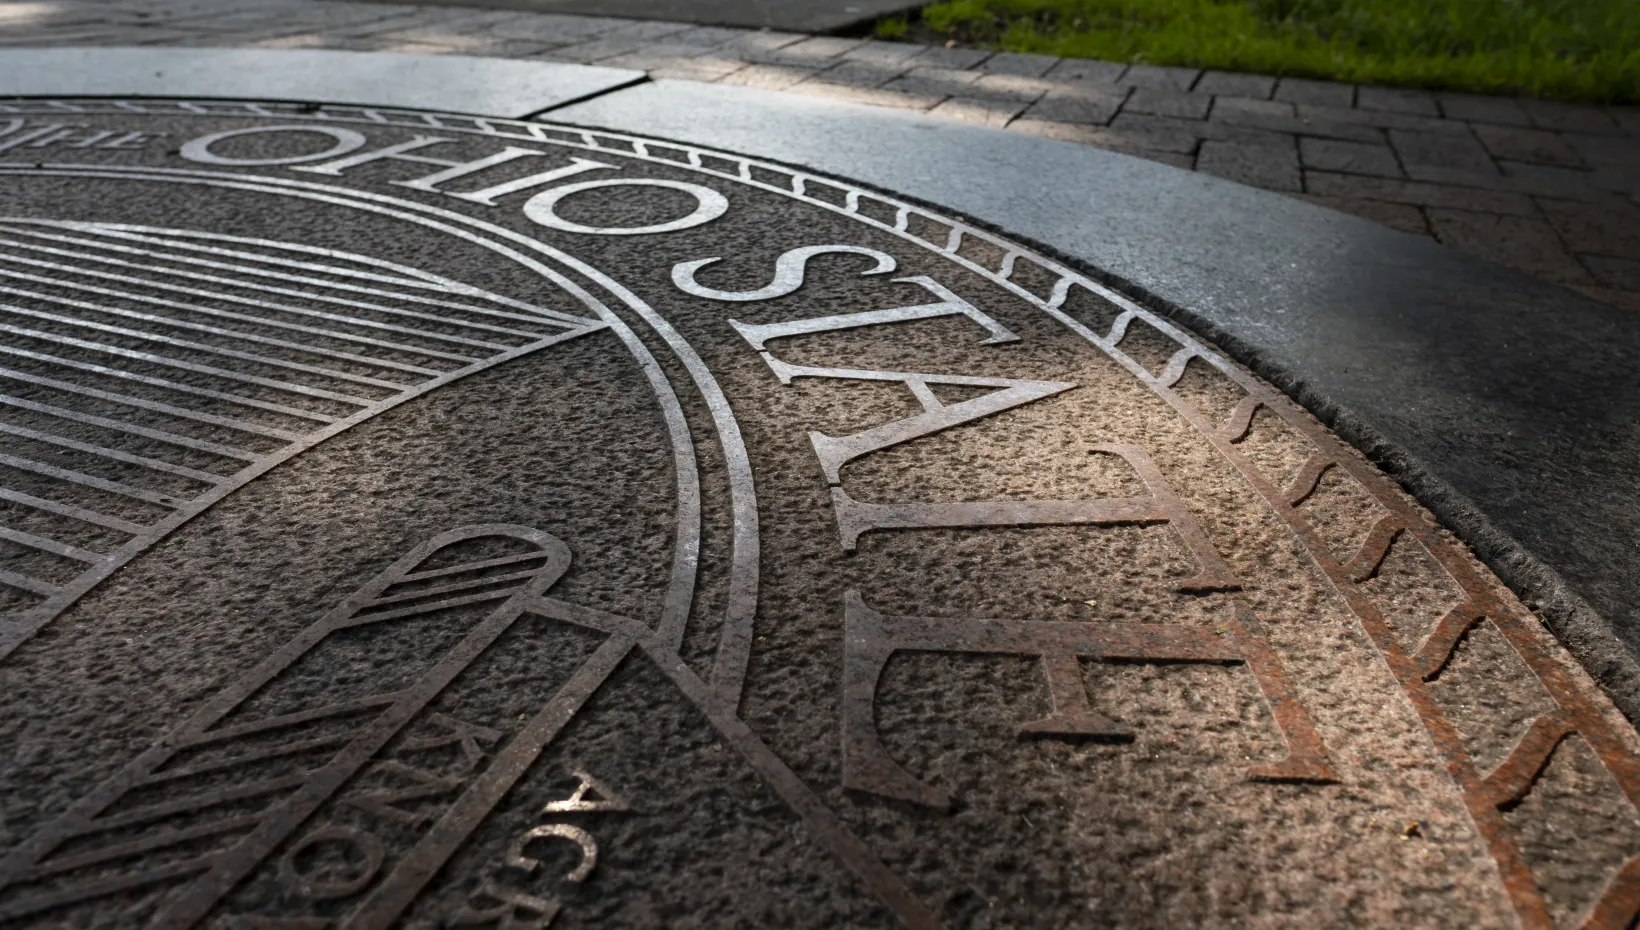 Ohio State University seal on the Oval